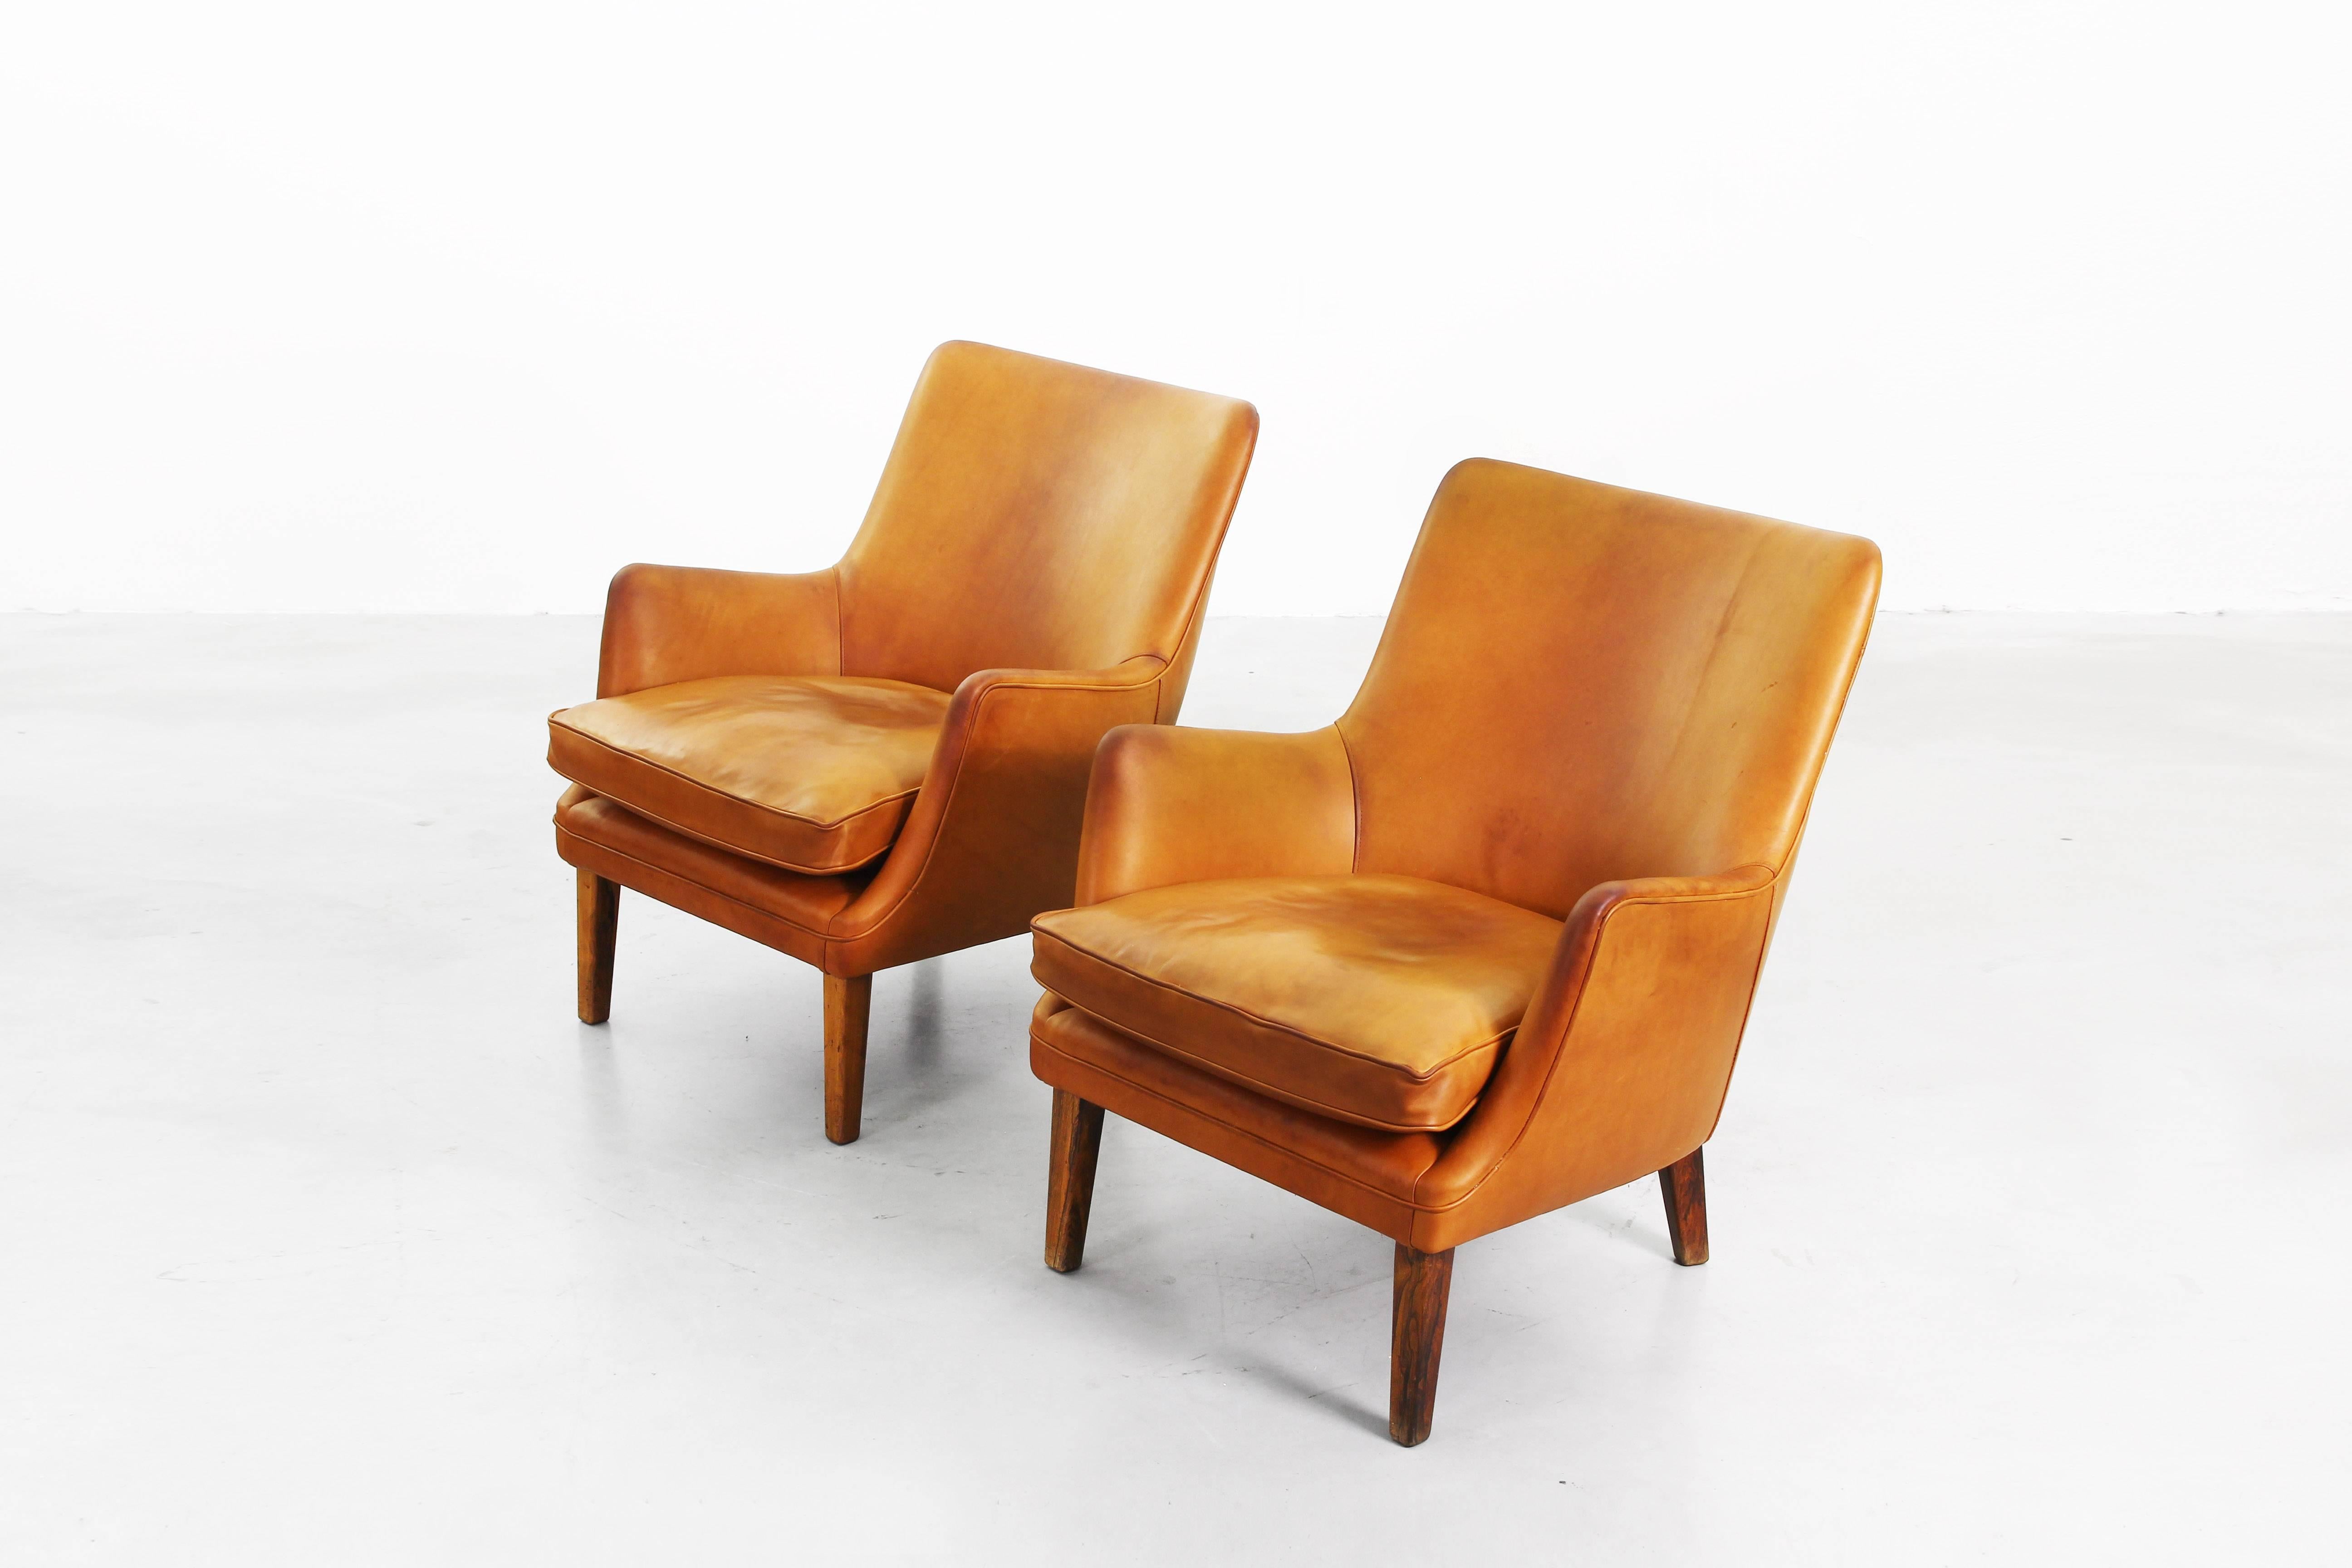 Beautiful Pair of Lounge Chairs by Arne Vodder for Ivan Schlechter Denmark, 1953 2